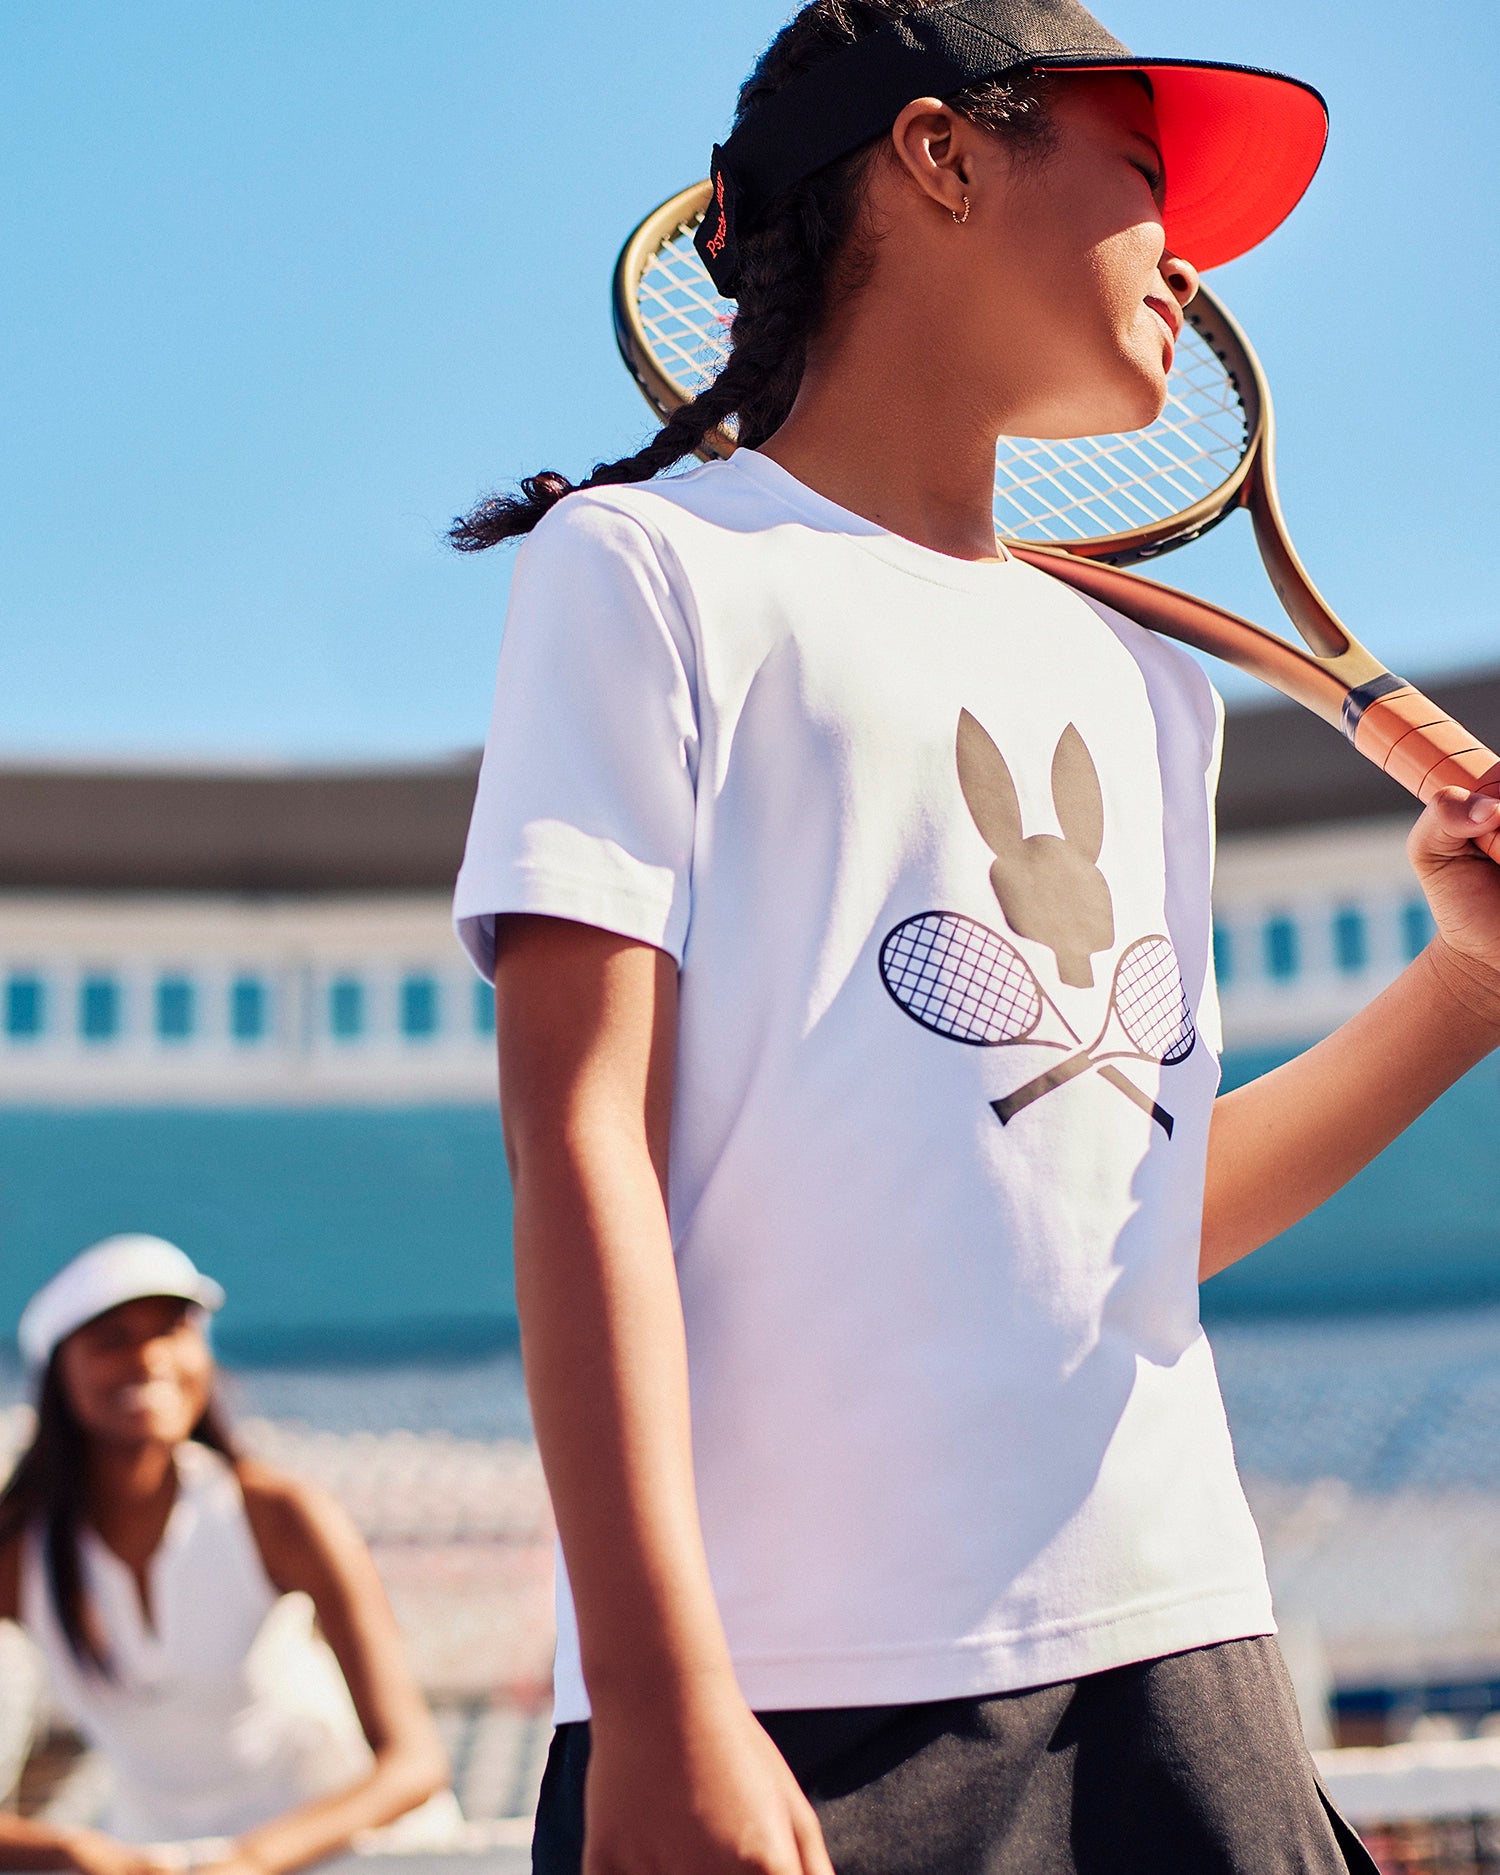 A young girl wearing a Psycho Bunny KIDS COURTSIDE GRAPHIC TEE - B0U681C200 featuring a rabbit and crossed tennis rackets, paired with a red visor, holds a racket over her shoulder. Another person in a white cap and outfit stands in the blurred background of the sunny tennis court.